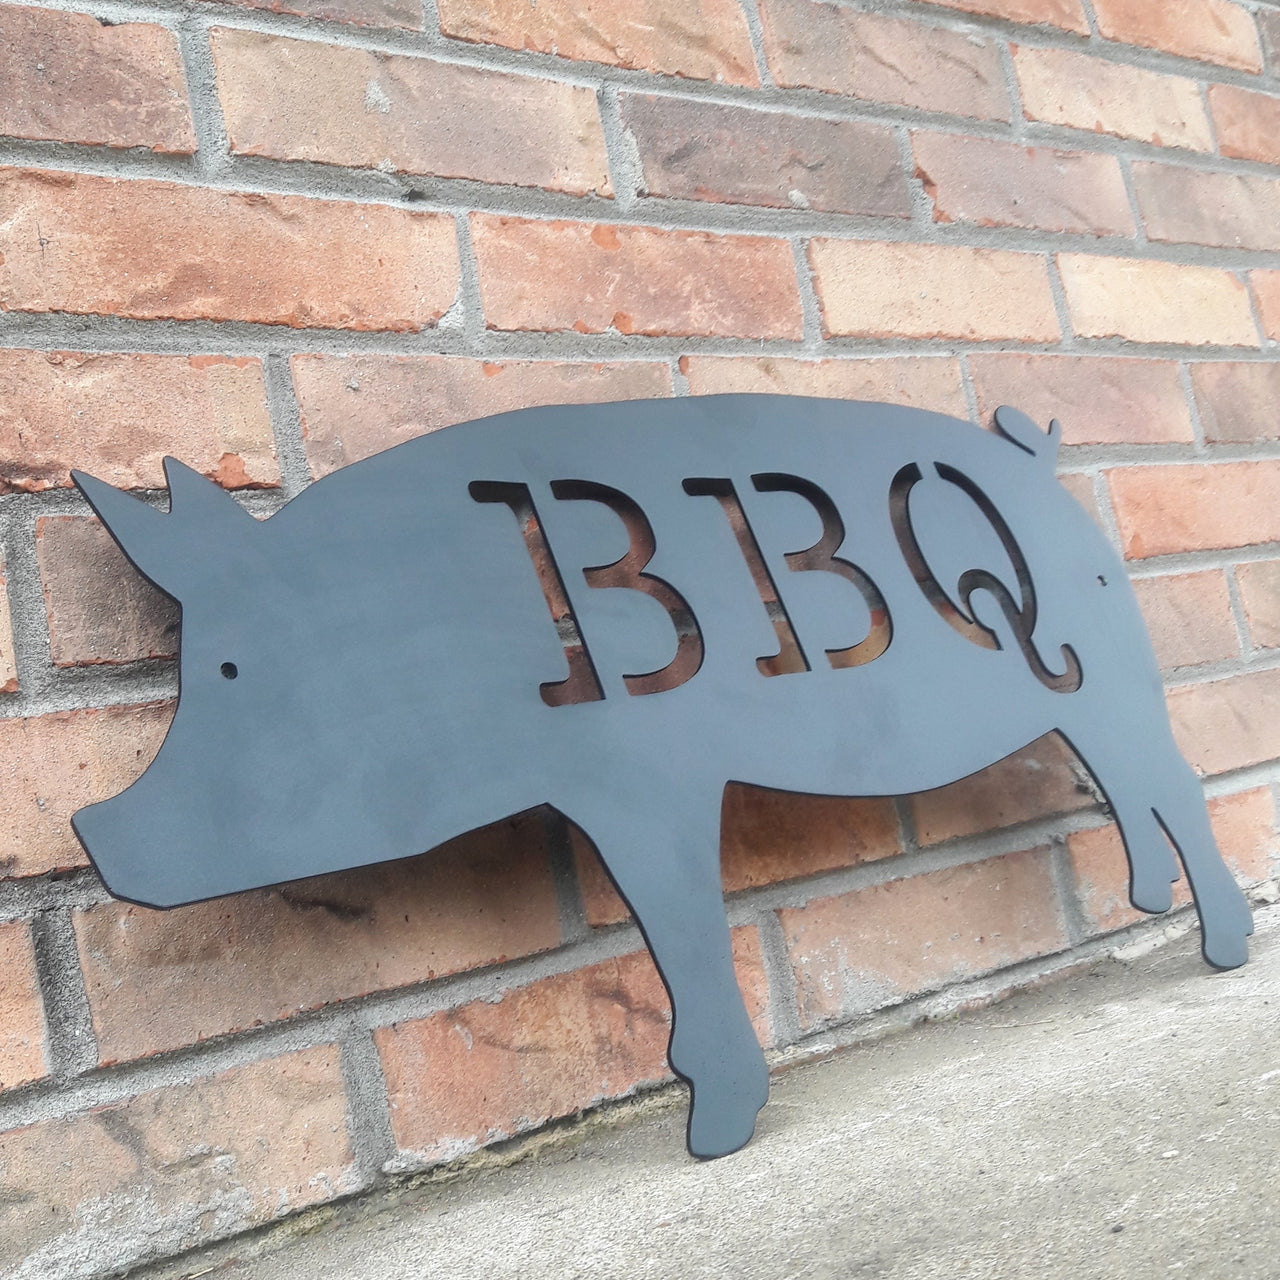 This is a black powder coated metal sign in the shape of pig with two 1/4" mounting holes. The sig reads, "BBQ"